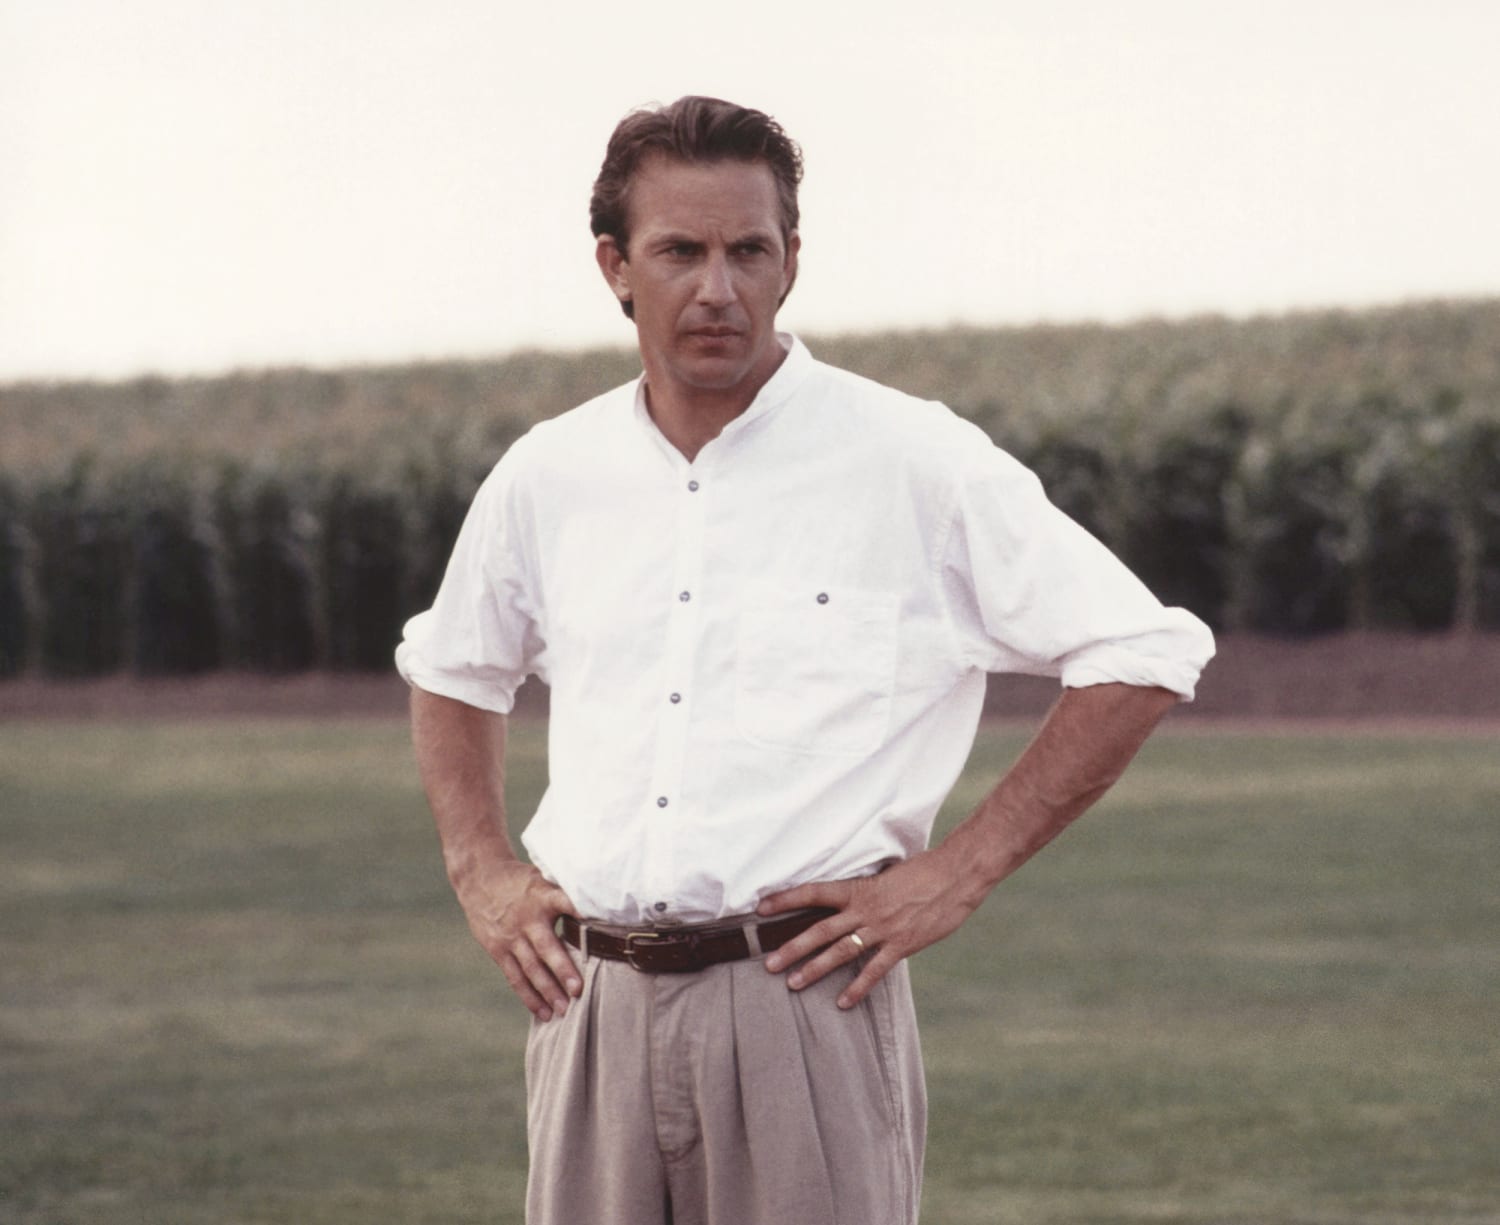 Field of Dreams Coming to Life in 2020